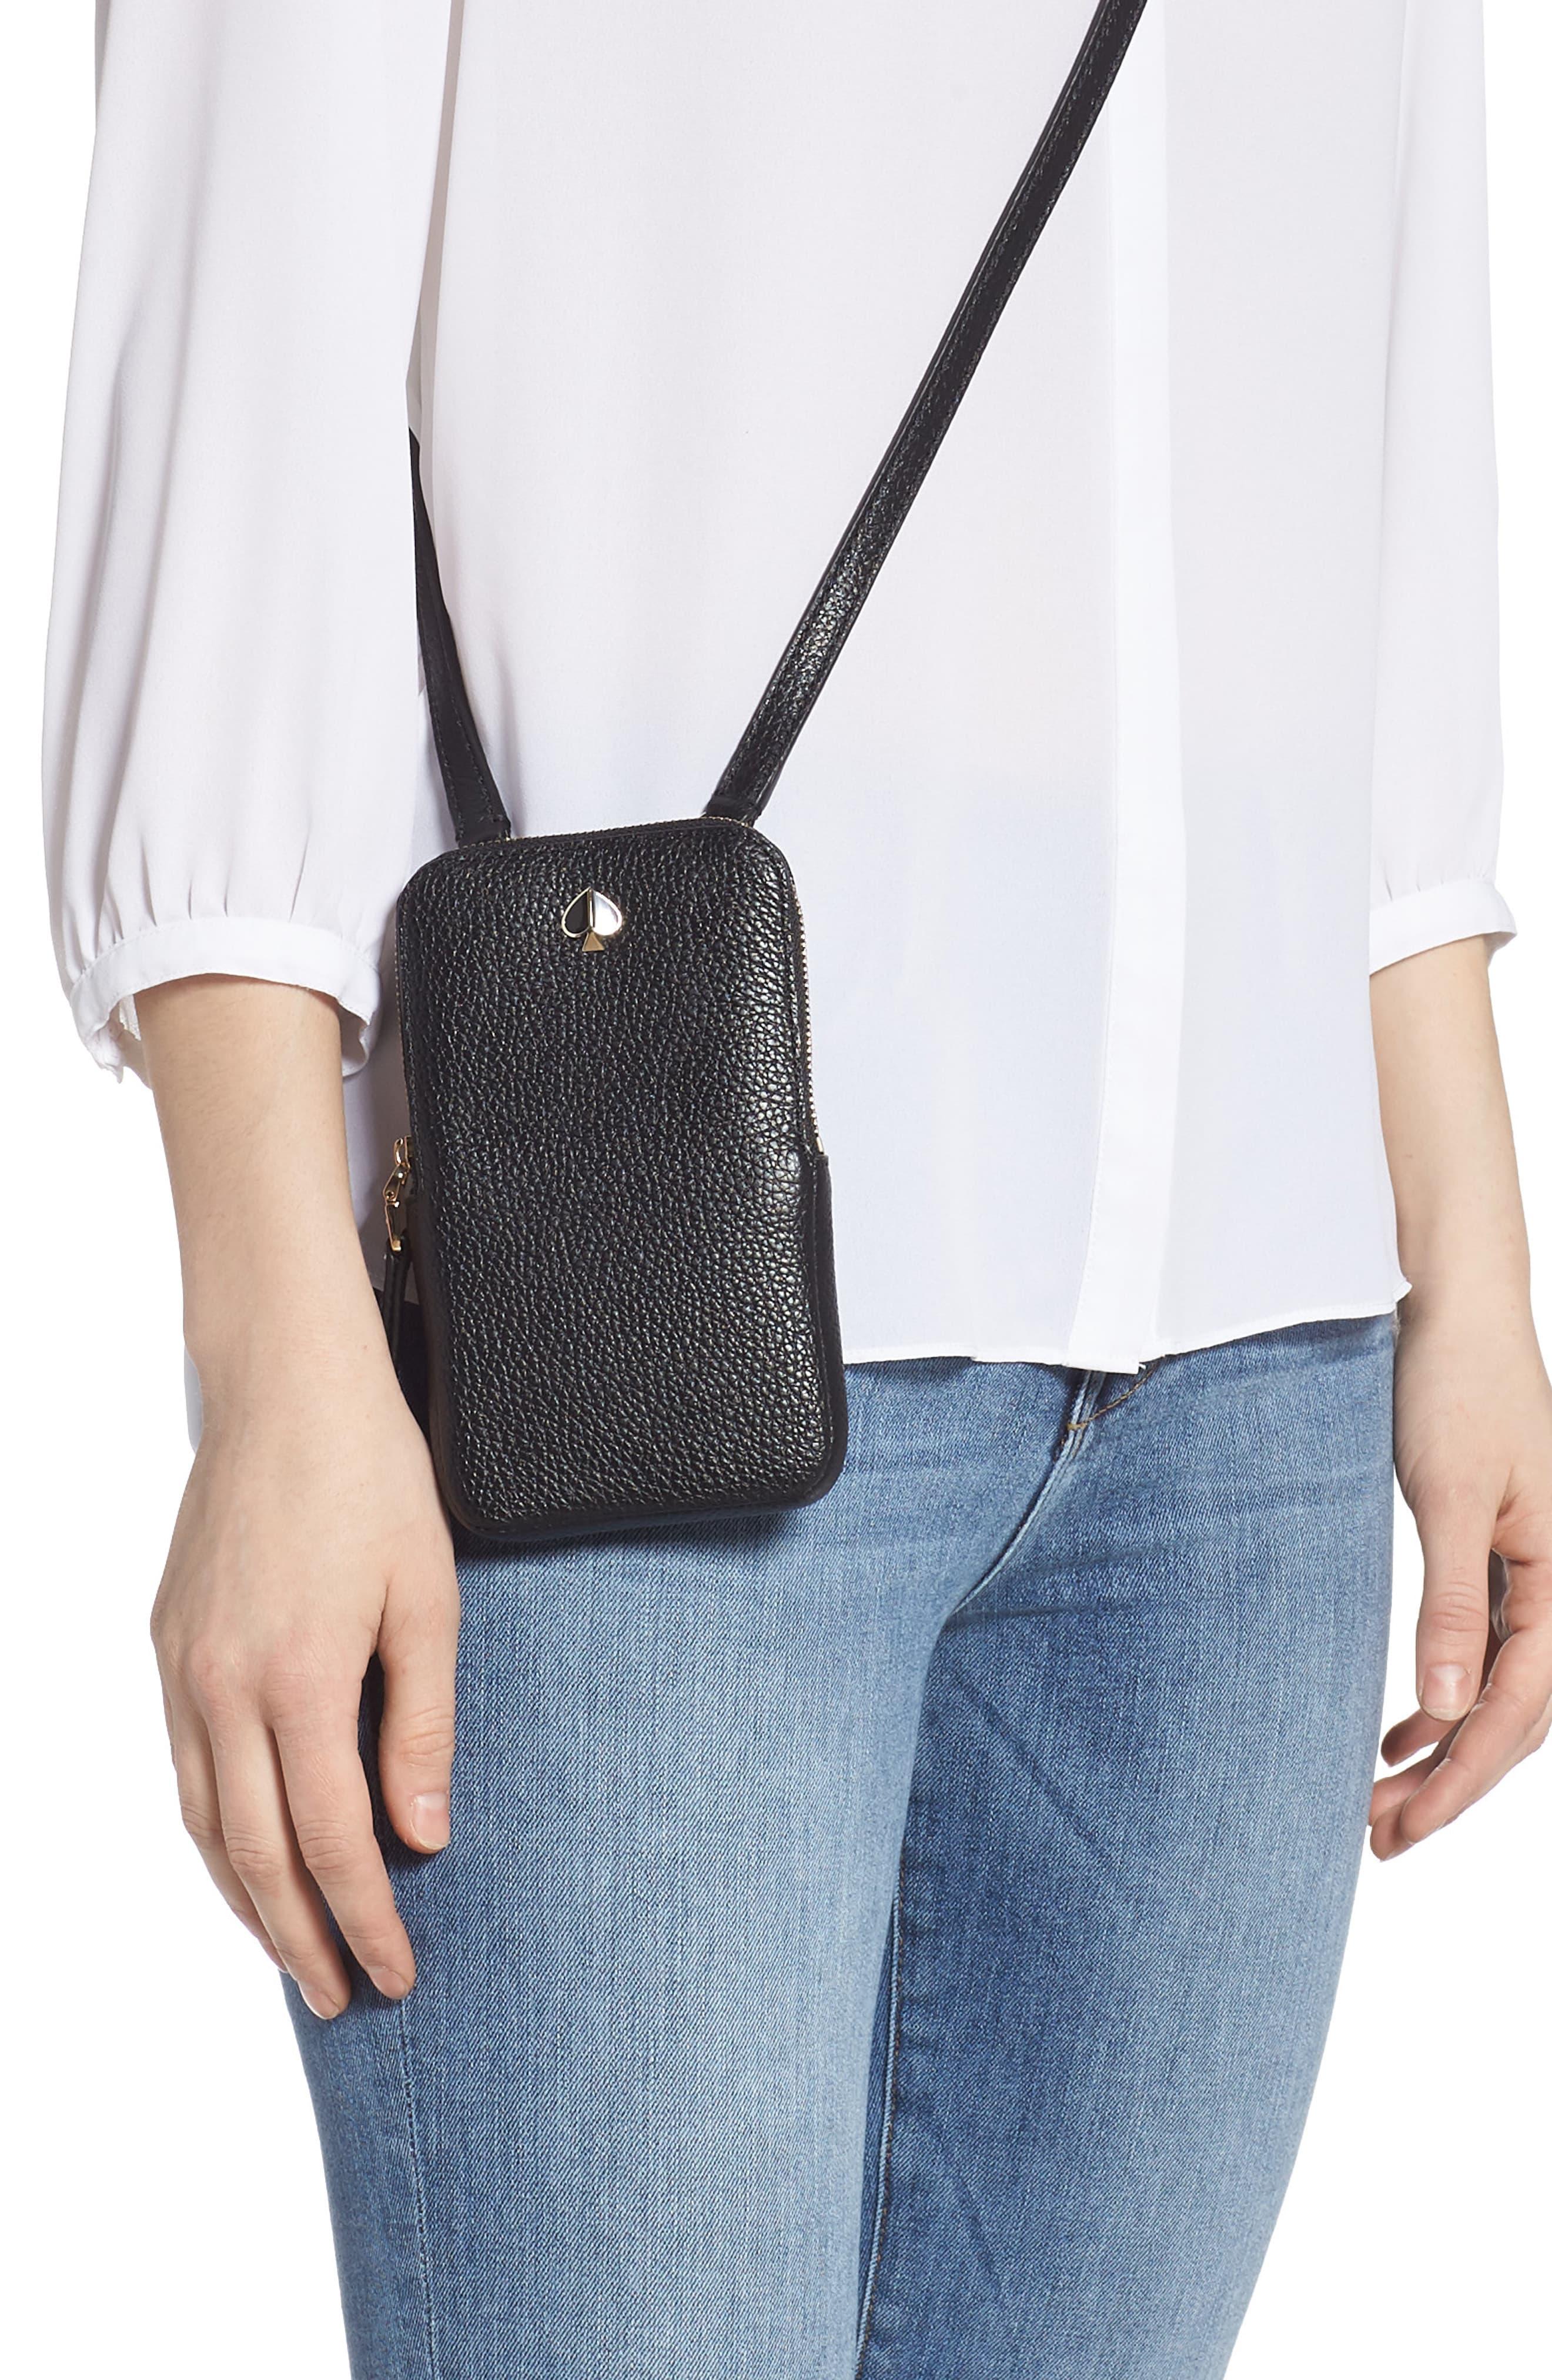 Kate Spade Polly Leather Phone Crossbody Bag in Black - Lyst